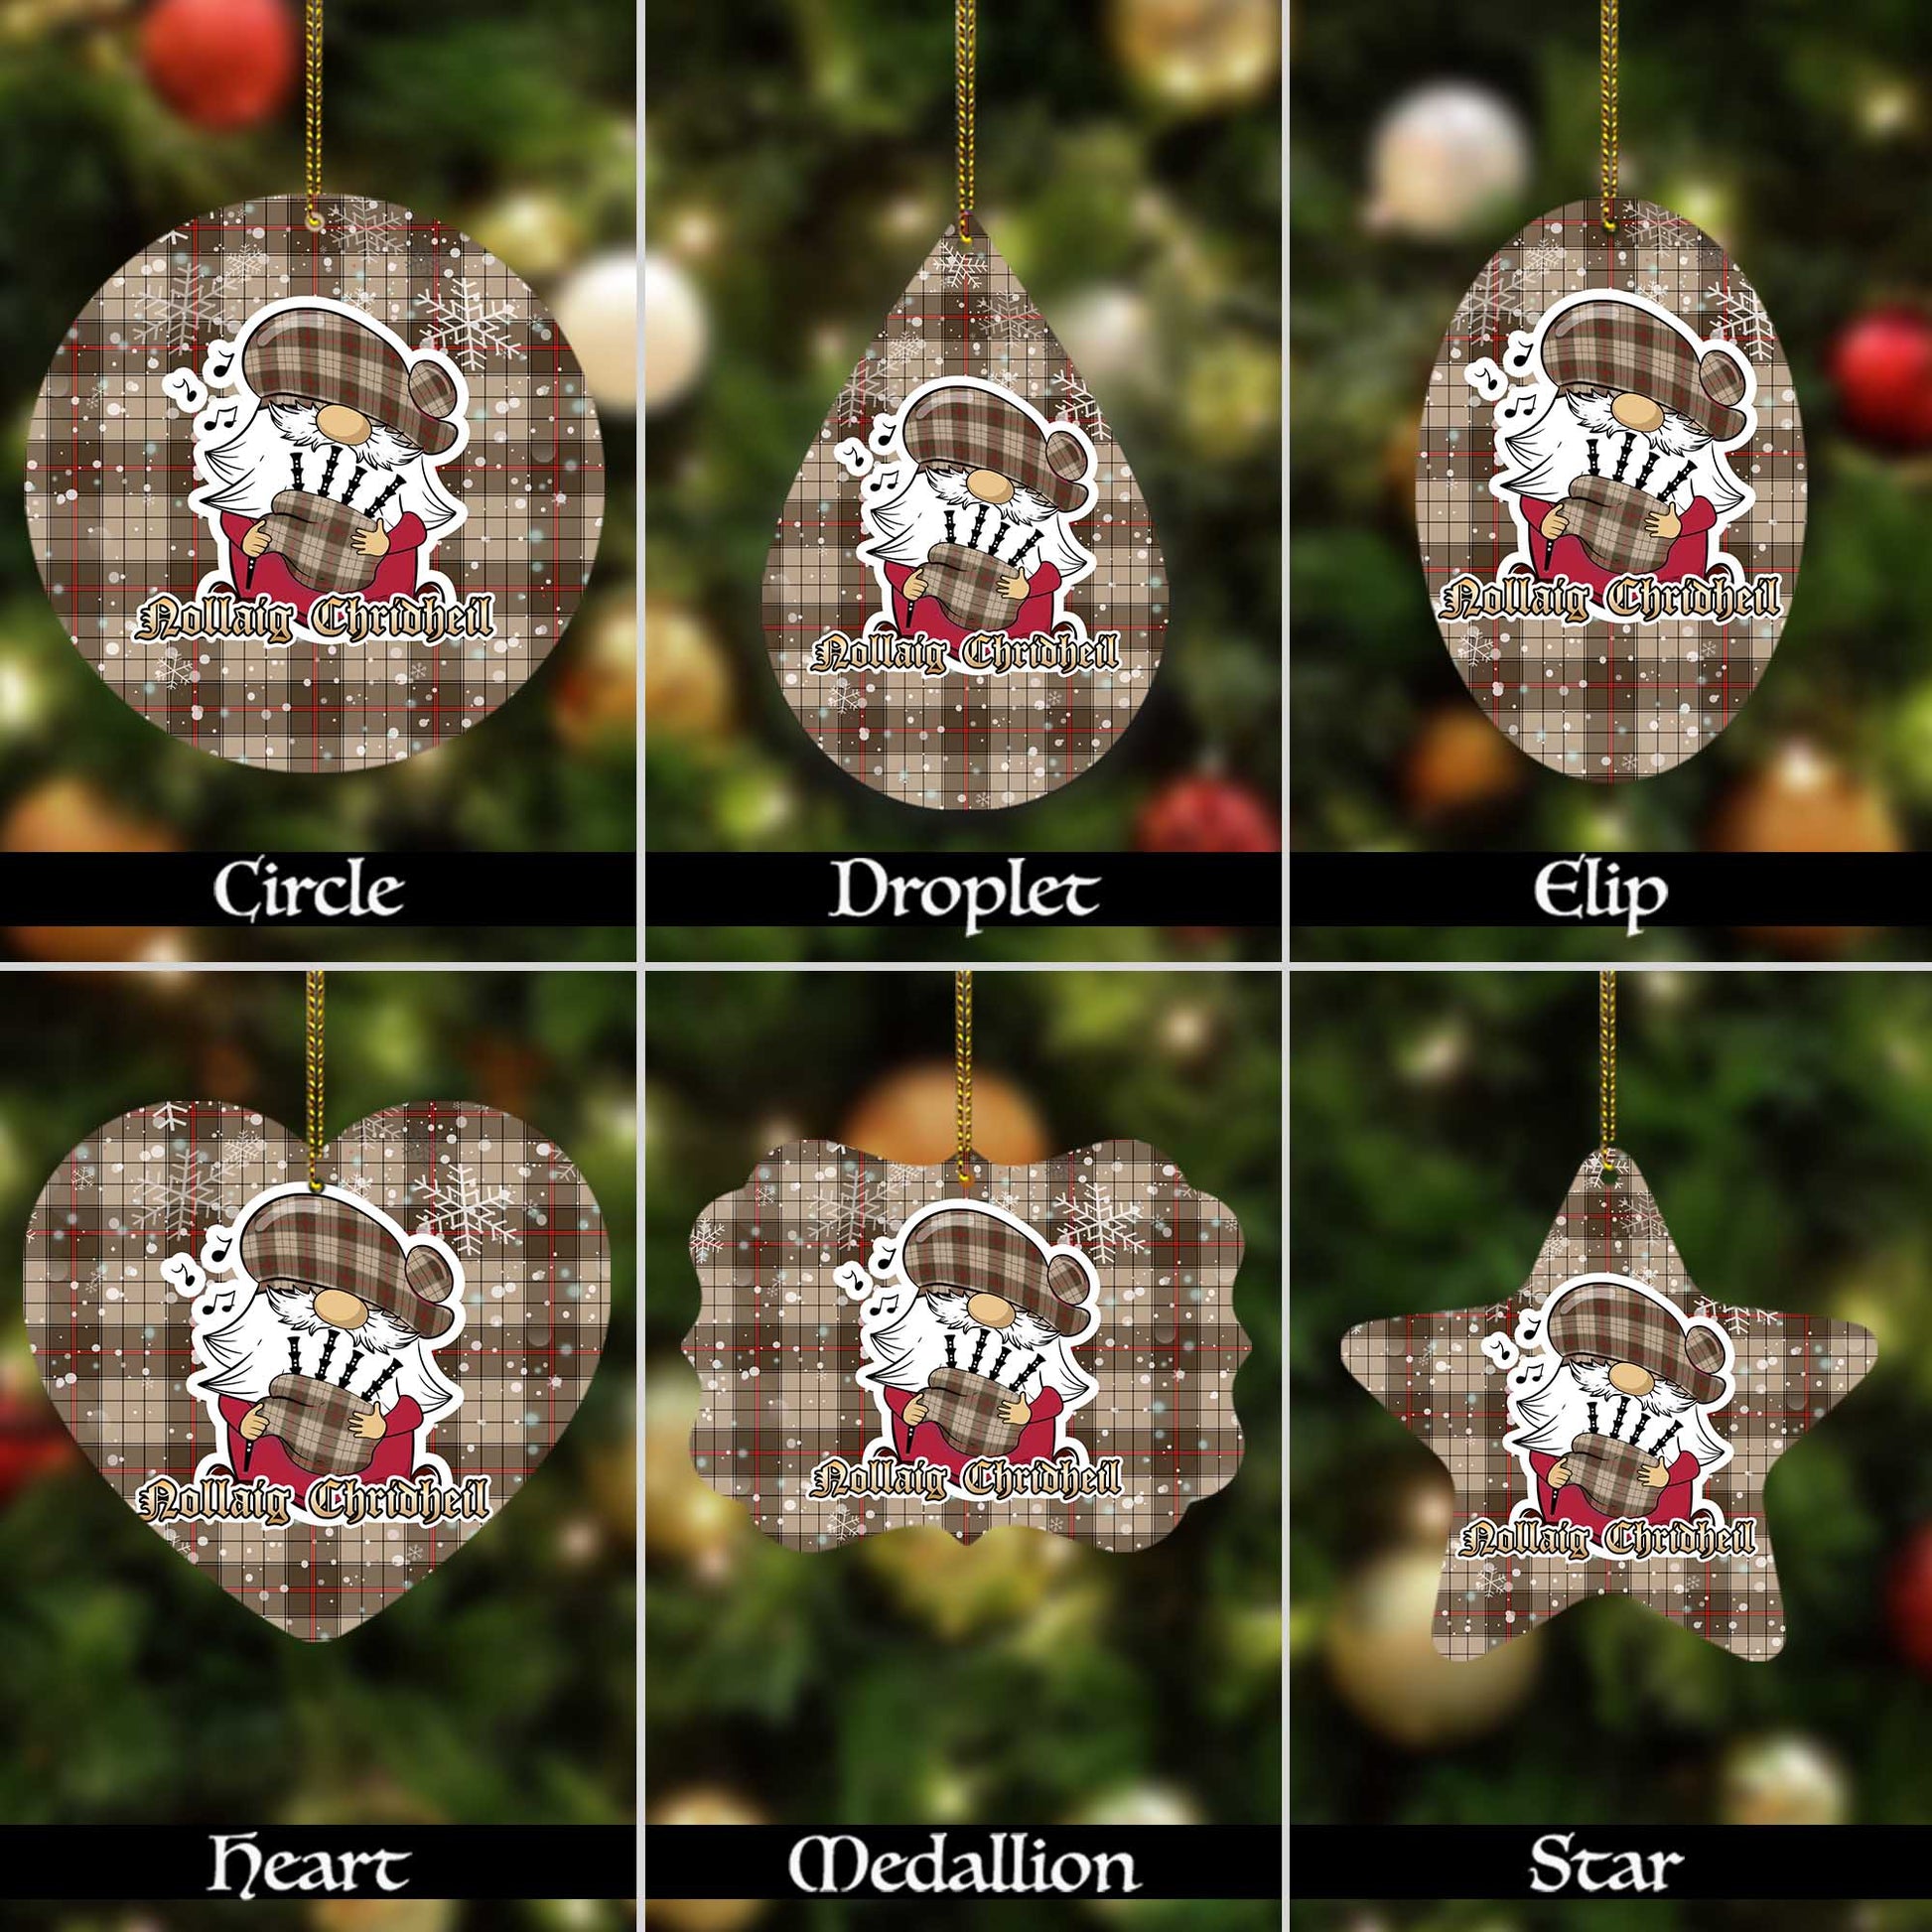 ulster-brown-modern-tartan-christmas-ornaments-with-scottish-gnome-playing-bagpipes